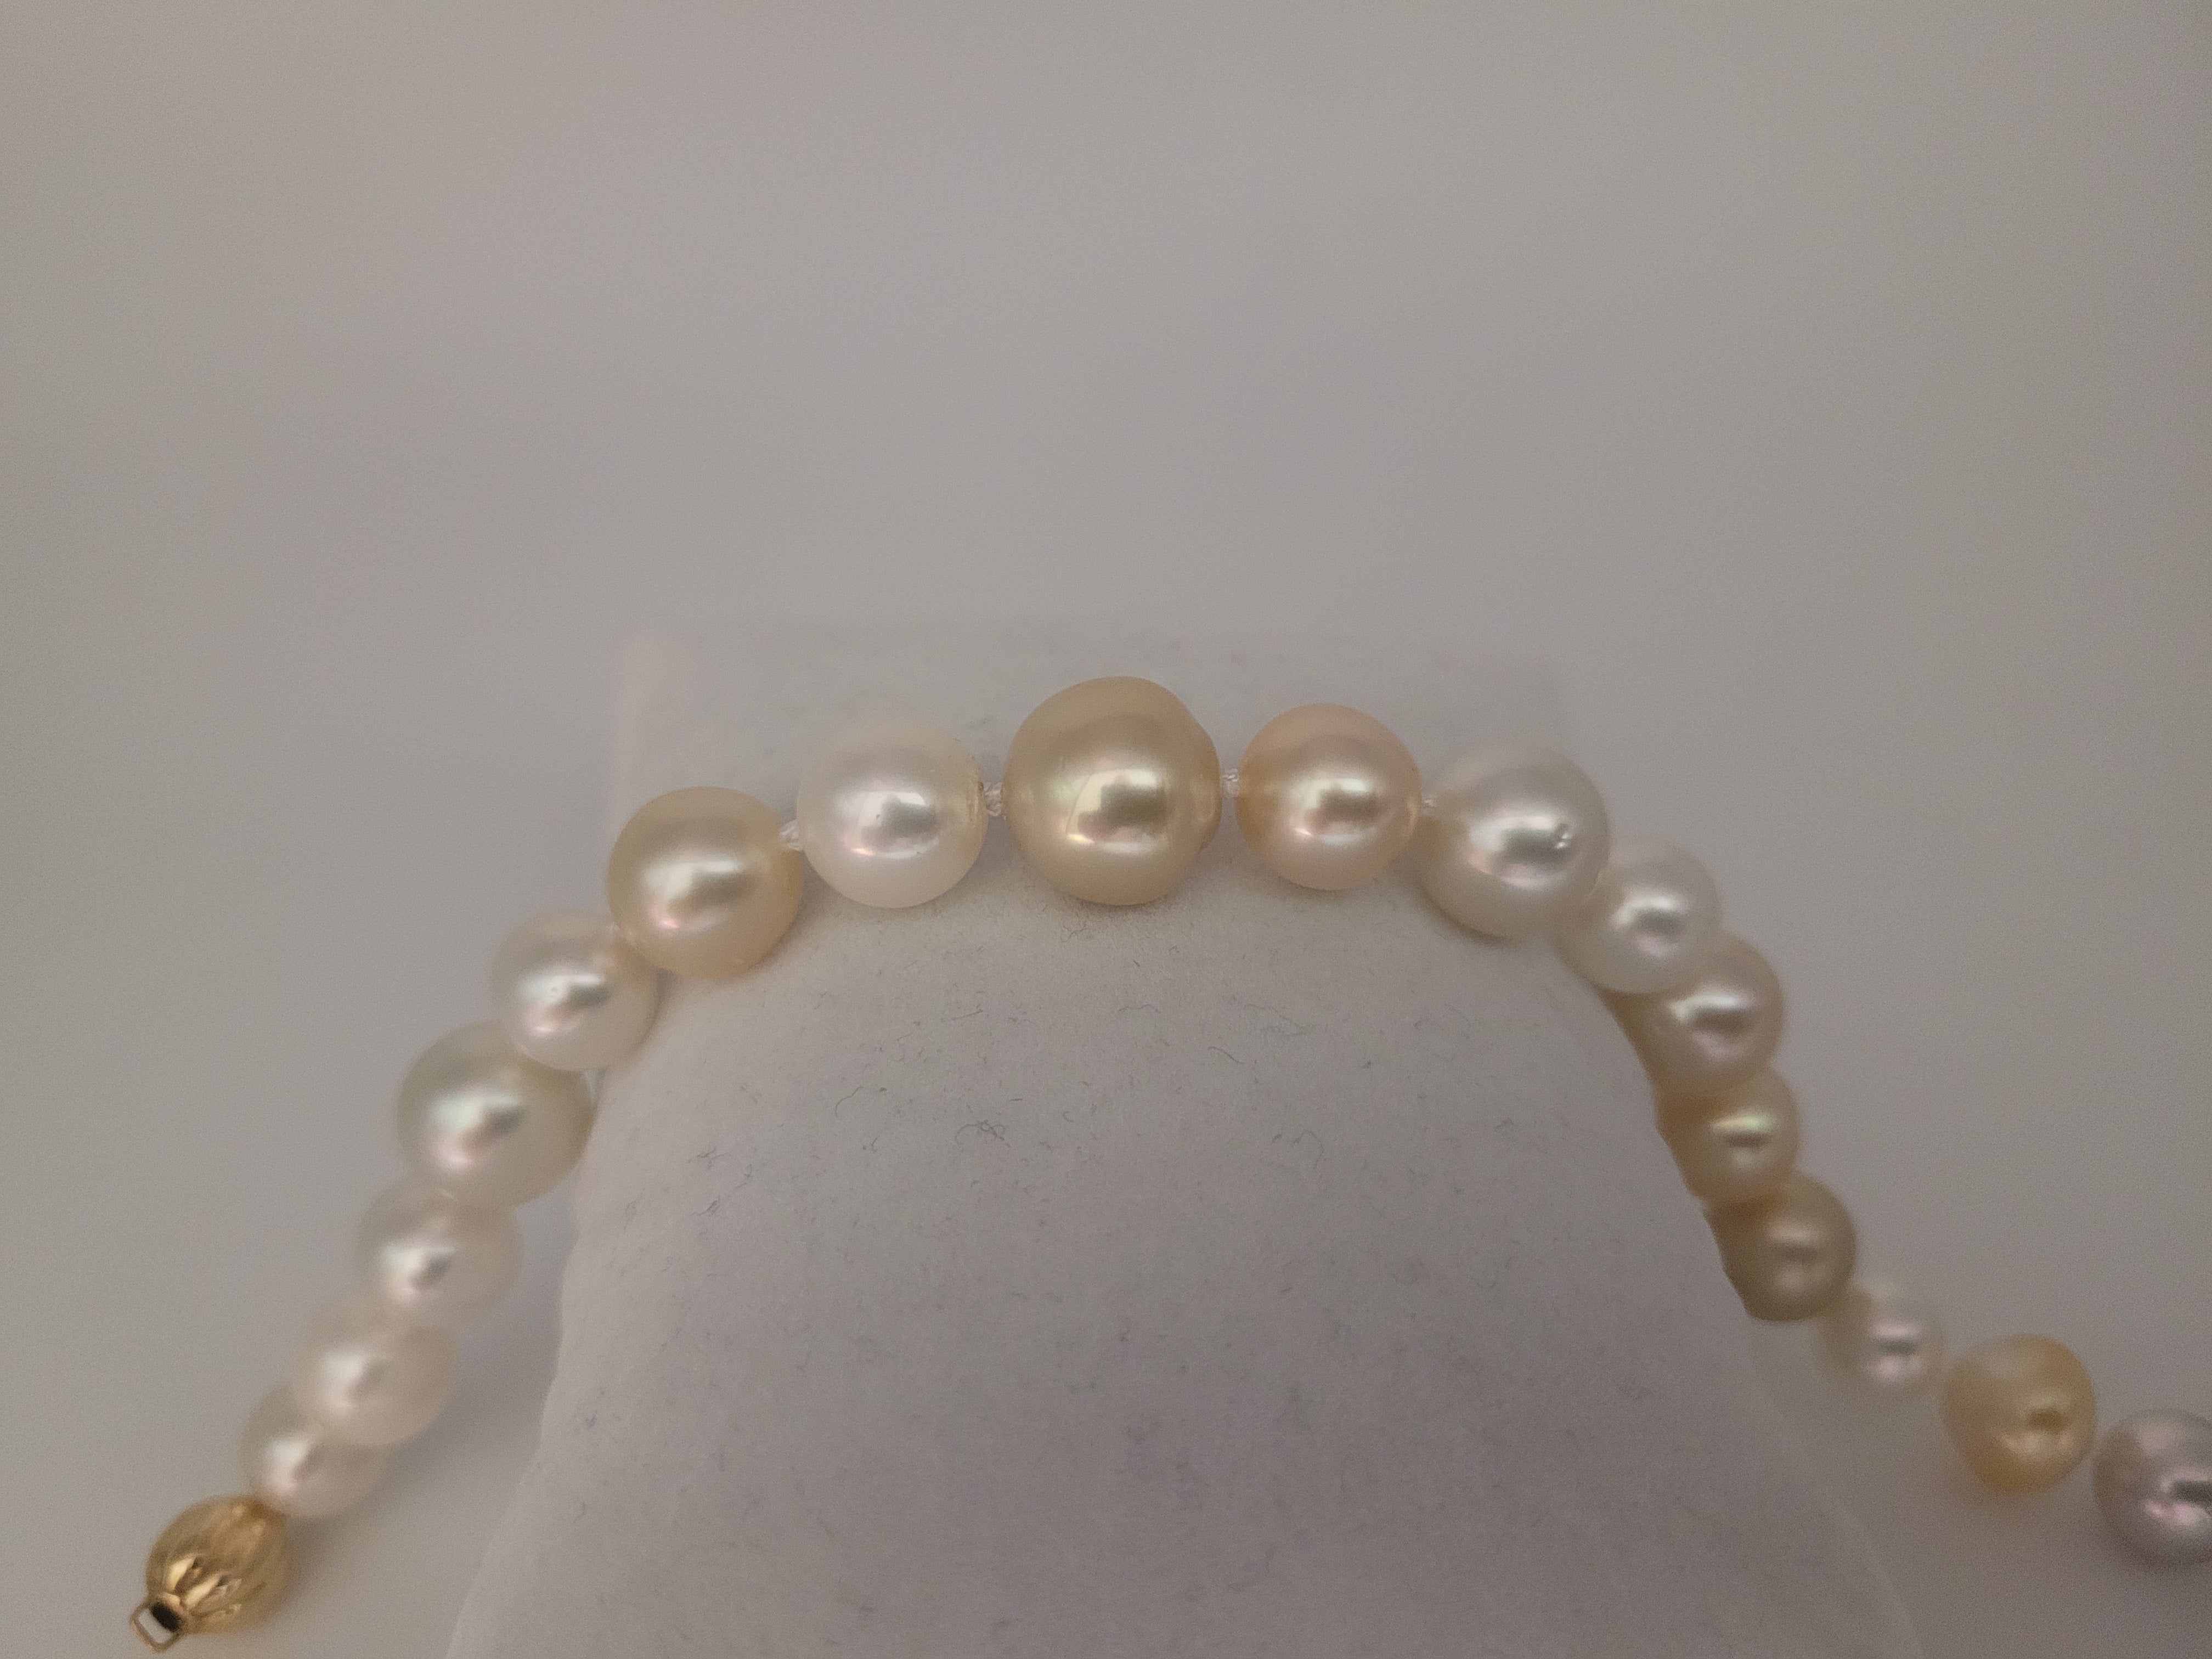 South Sea Pearls Bracelet Golden and White Natural Color Pearls 9.40-11.60 mm 18K Gold Clasp